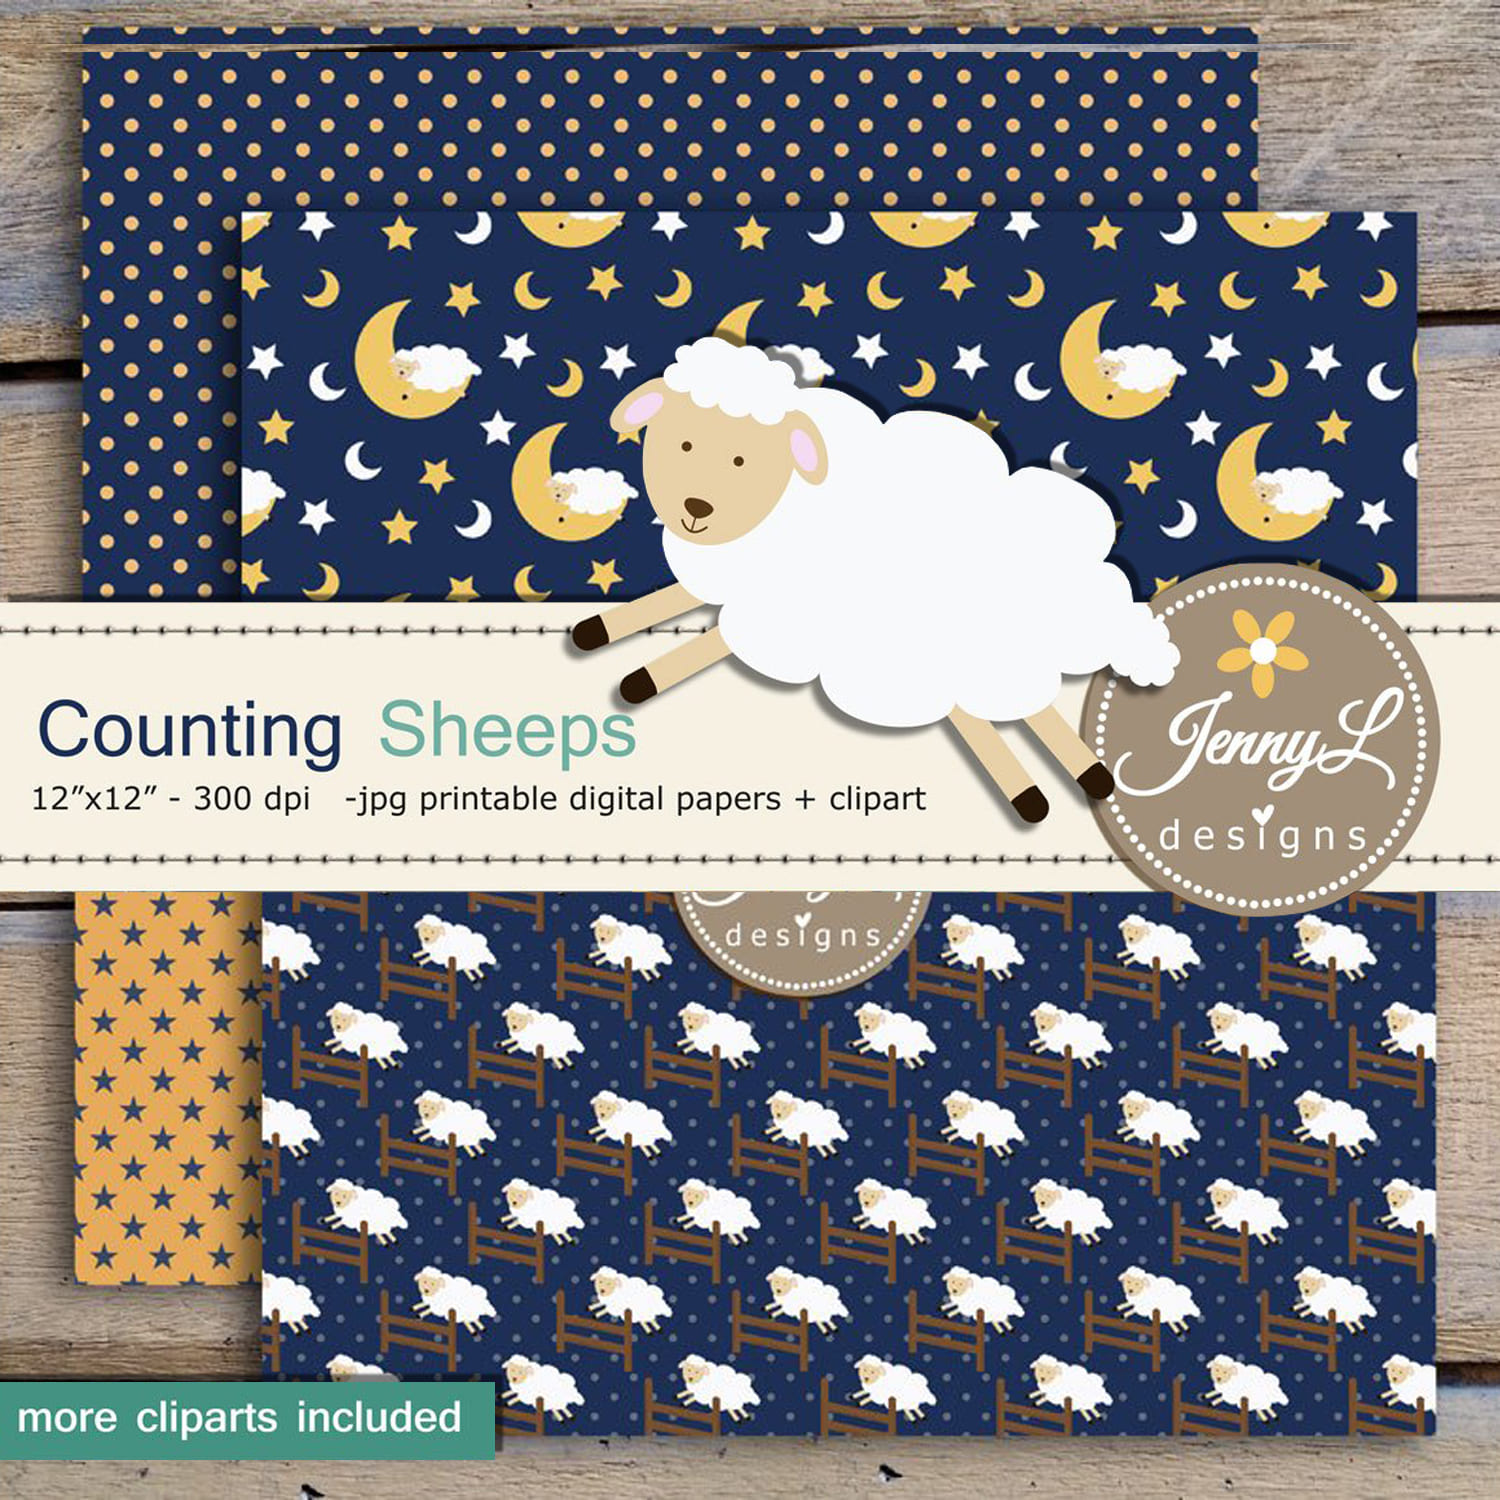 Sheep Digital Papers & Clipart cover.